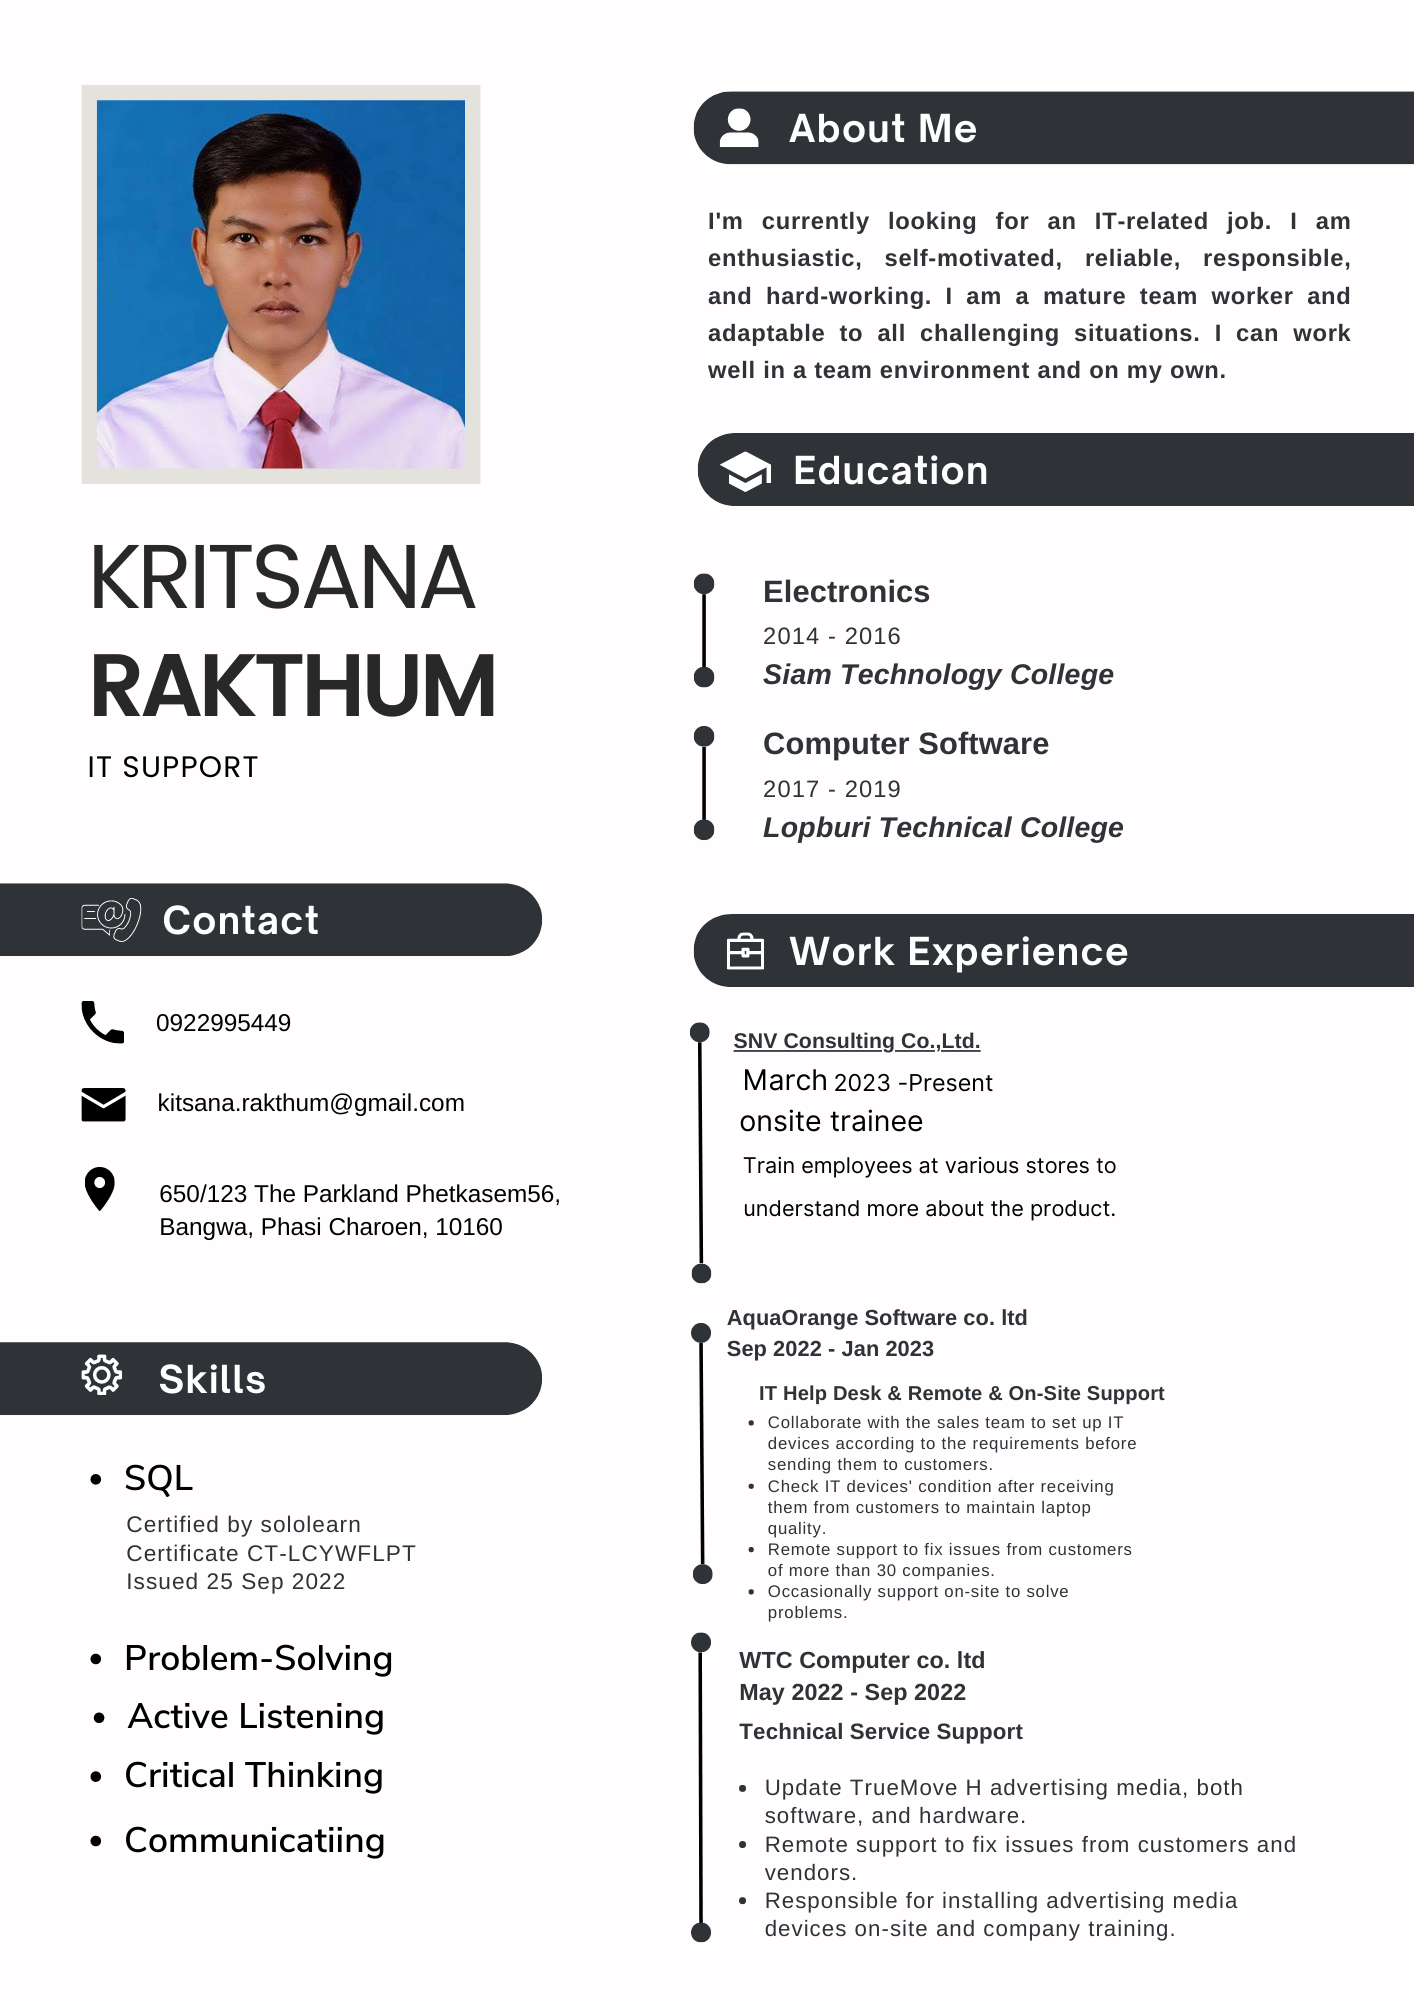 t

KRITSANA
RAKTHUM

IT SUPPORT

0922995449

kitsana.rakthum@gmail.com

© Ur

Bangwa, Phasi Charoen, 10160

LE

pan

. SQL

Certified by sololearn
Certificate CT-LCYWFLPT
Issued 25 Sep 2022

* Problem-Solving
* Active Listening

e Critical Thinking

¢ Communicatiing

650/123 The Parkland Phetkasem56,

2 About Me

I'm currently looking for an IT-related job. | am
enthusiastic, self-motivated, reliable, responsible,
and hard-working. | am a mature team worker and
adaptable to all challenging situations. | can work
well in a team environment and on my own.

® Education

Electronics
2014 - 2016
Siam Technology College

Computer Software
2017 - 2019
Lopburi Technical College

[5 Work Experience ~~ LY ECL EU TG

SNV Consulting Co.,Ltd.

March 2023 -Present

onsite trainee

Train employees at various stores to

understand more about the product.

AquaOrange Software co. Itd

Sep 2022 - Jan 2023
IT JG Desk & Remote & On-Site Support
g them to cu

  
 
  

 

 

m 10 set up IT

irements before
IT devices’ condition after receiving
rom customers to maintain laptop

 

quality
+ Remote §
ot mor
asionally support on-sit
problems

4ppOrt to tix
han 30 companies.

      

WTC Computer co. ltd
May 2022 - Sep 2022

Technical Service Support

« Update TrueMove H advertising media. both
software, and hardware

« Remote support to fix issues from customers and
vendors

* Responsible for installing advertising media
devices on-site and company training